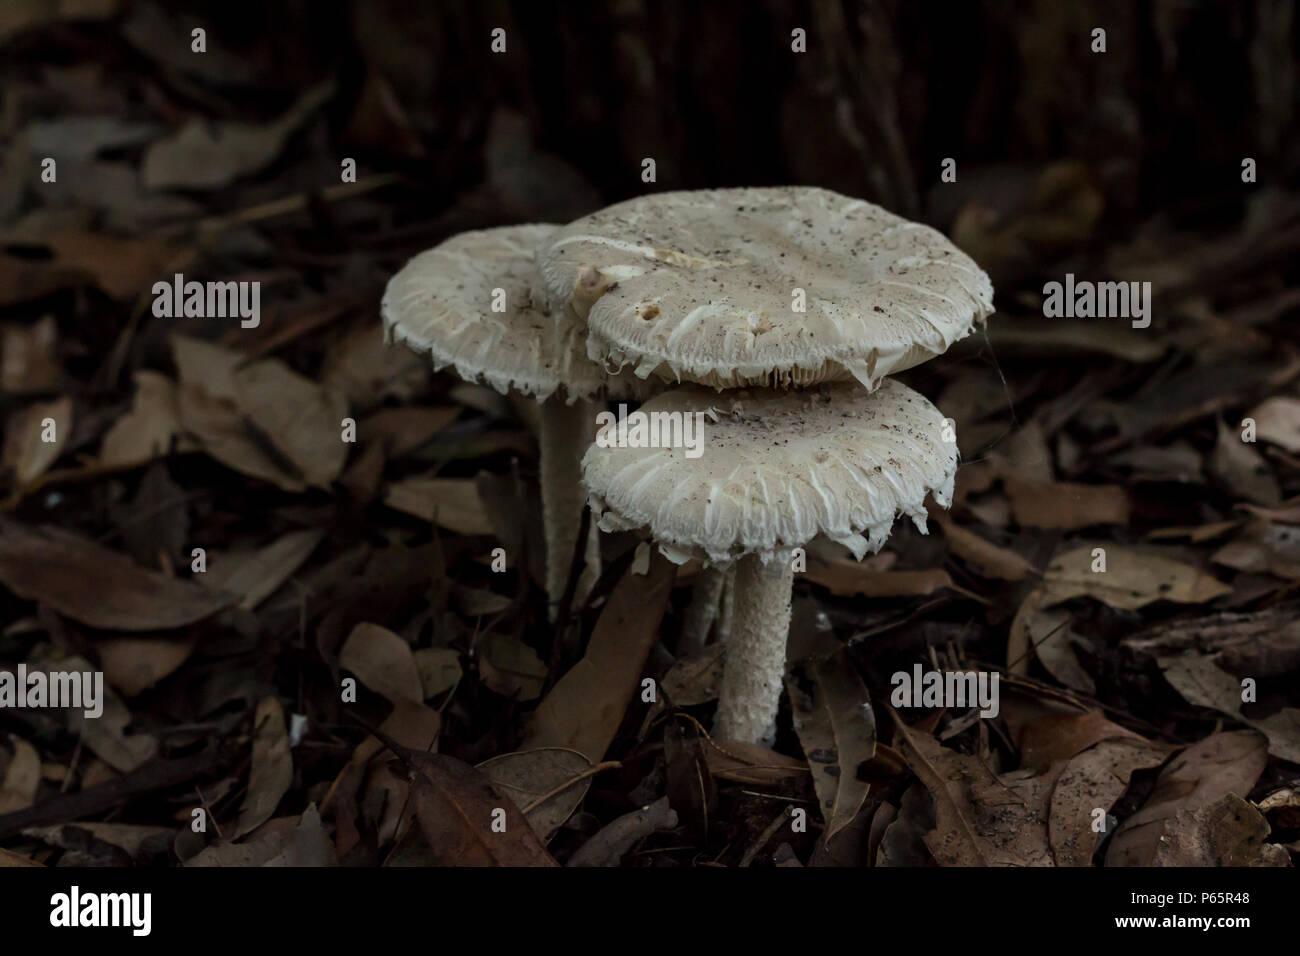 Trio white mushroom fungi toadstools in garden bed of brown leaves Stock Photo